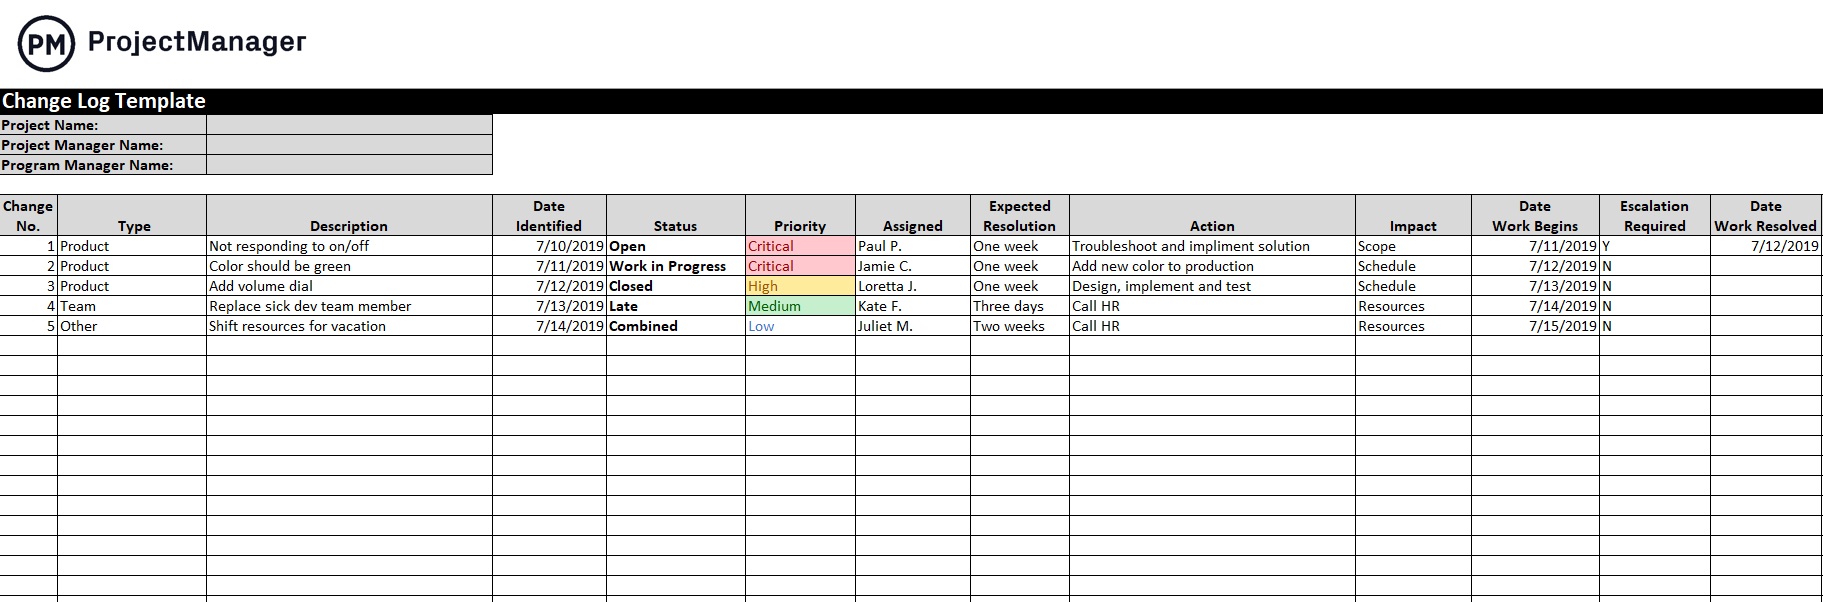 Project Change Log Template for Microsoft Excel